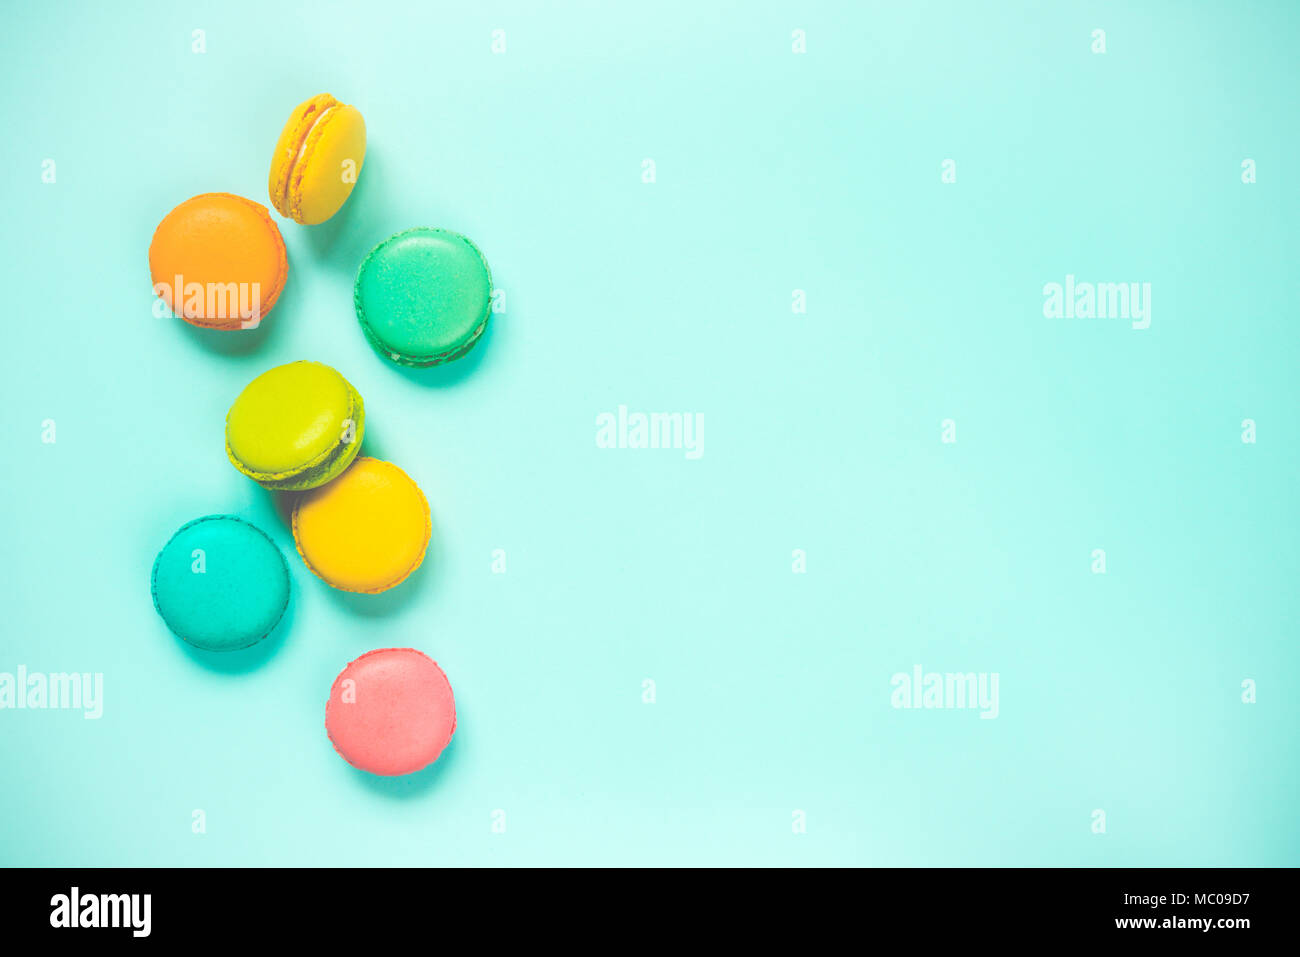 Colorful macaroons arranged over blue background. Copy space. Vintage effect. Stock Photo